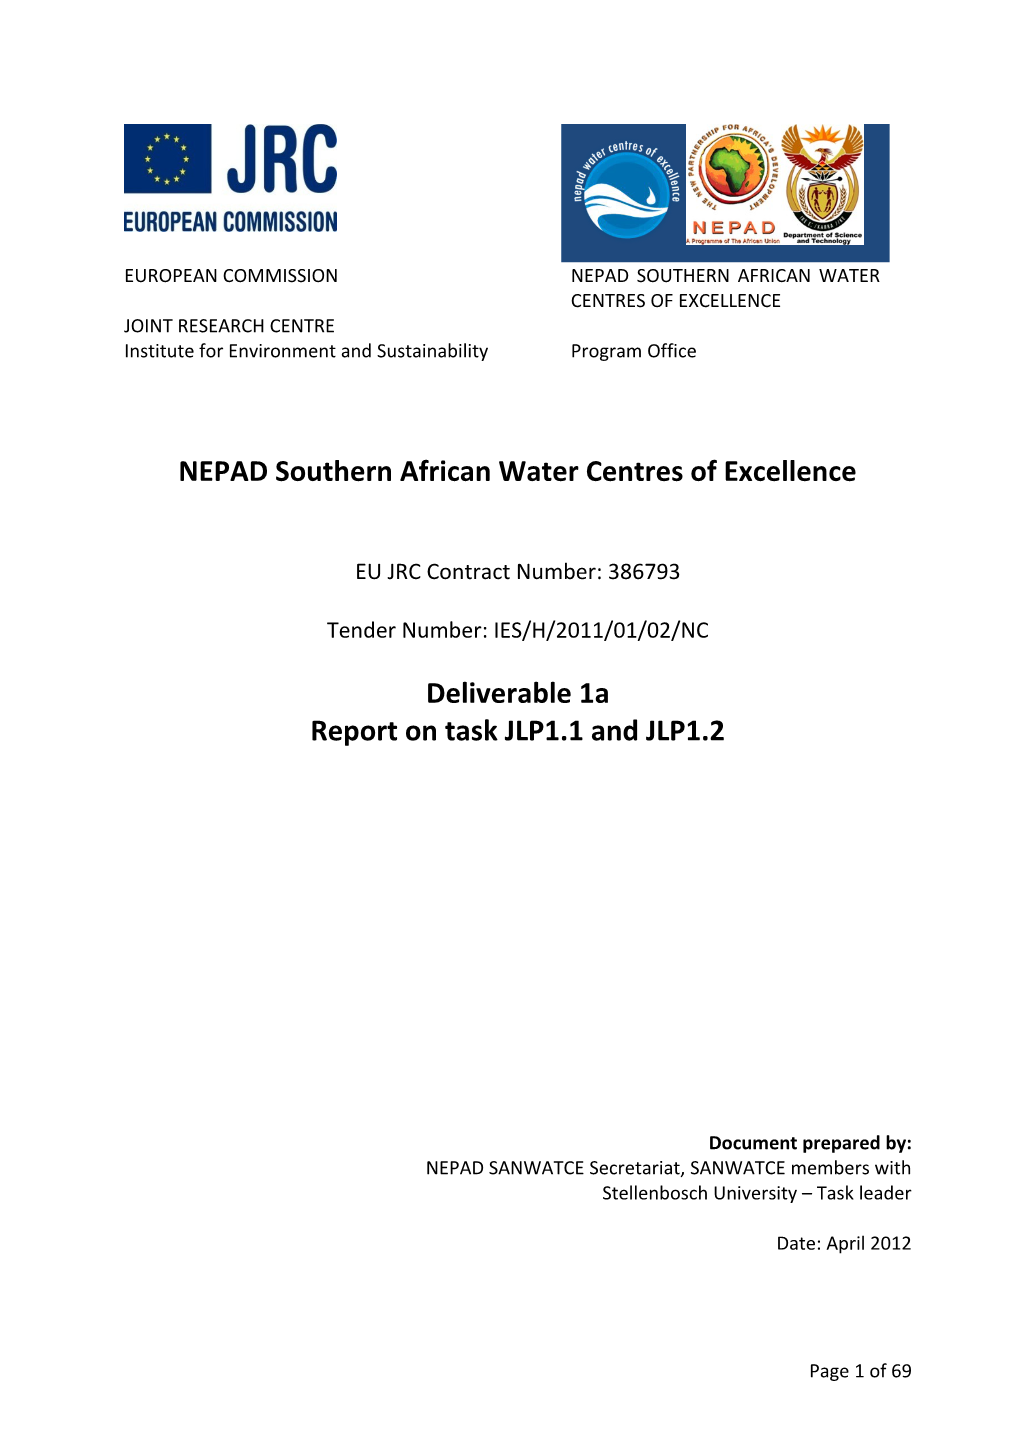 Nepad Southern African Water Centres of Excellence